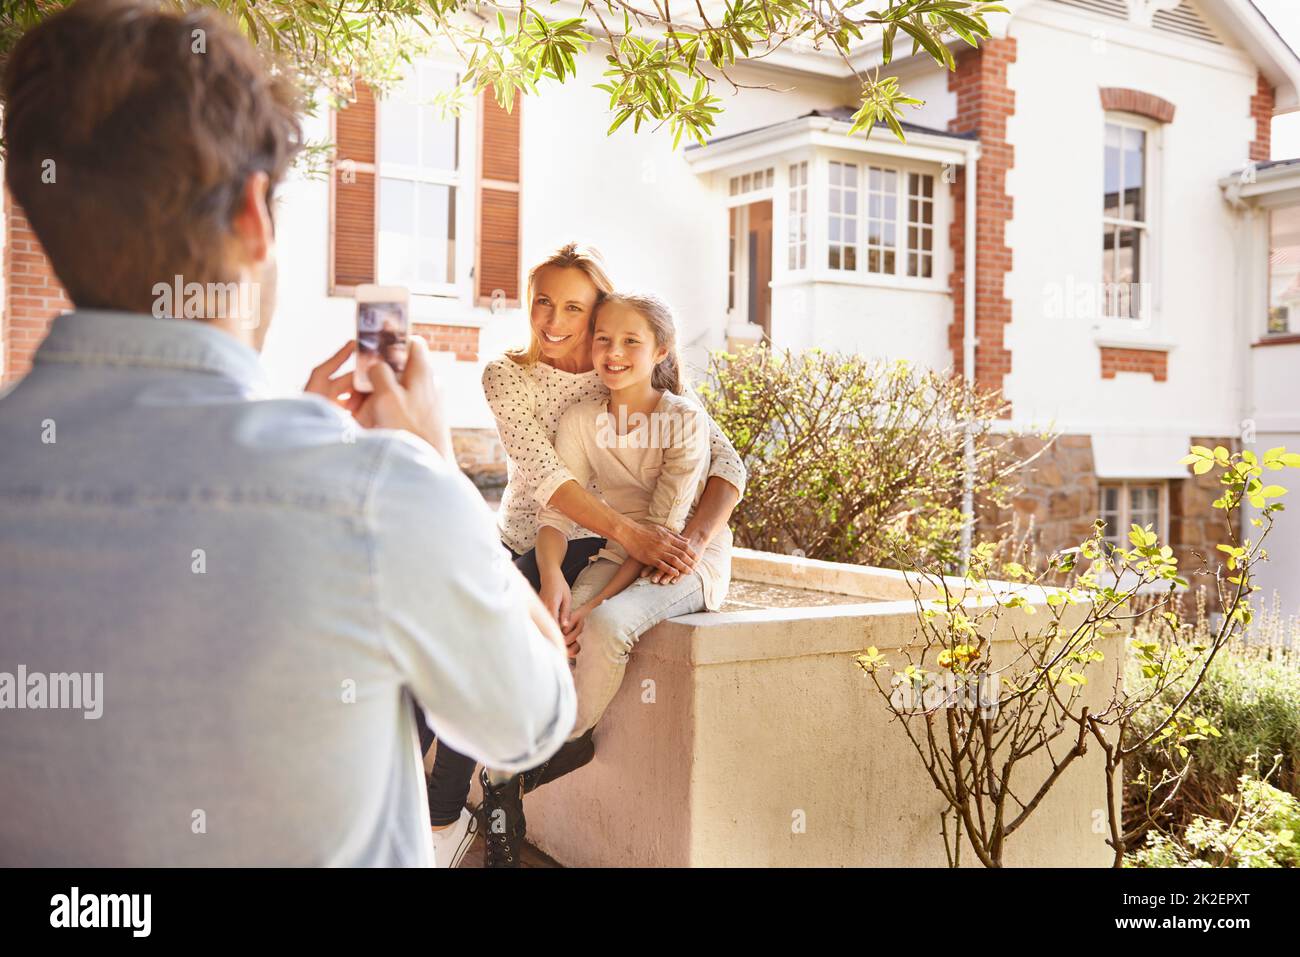 Smile. A man taking a photo of his wife and daughter in their garden. Stock Photo